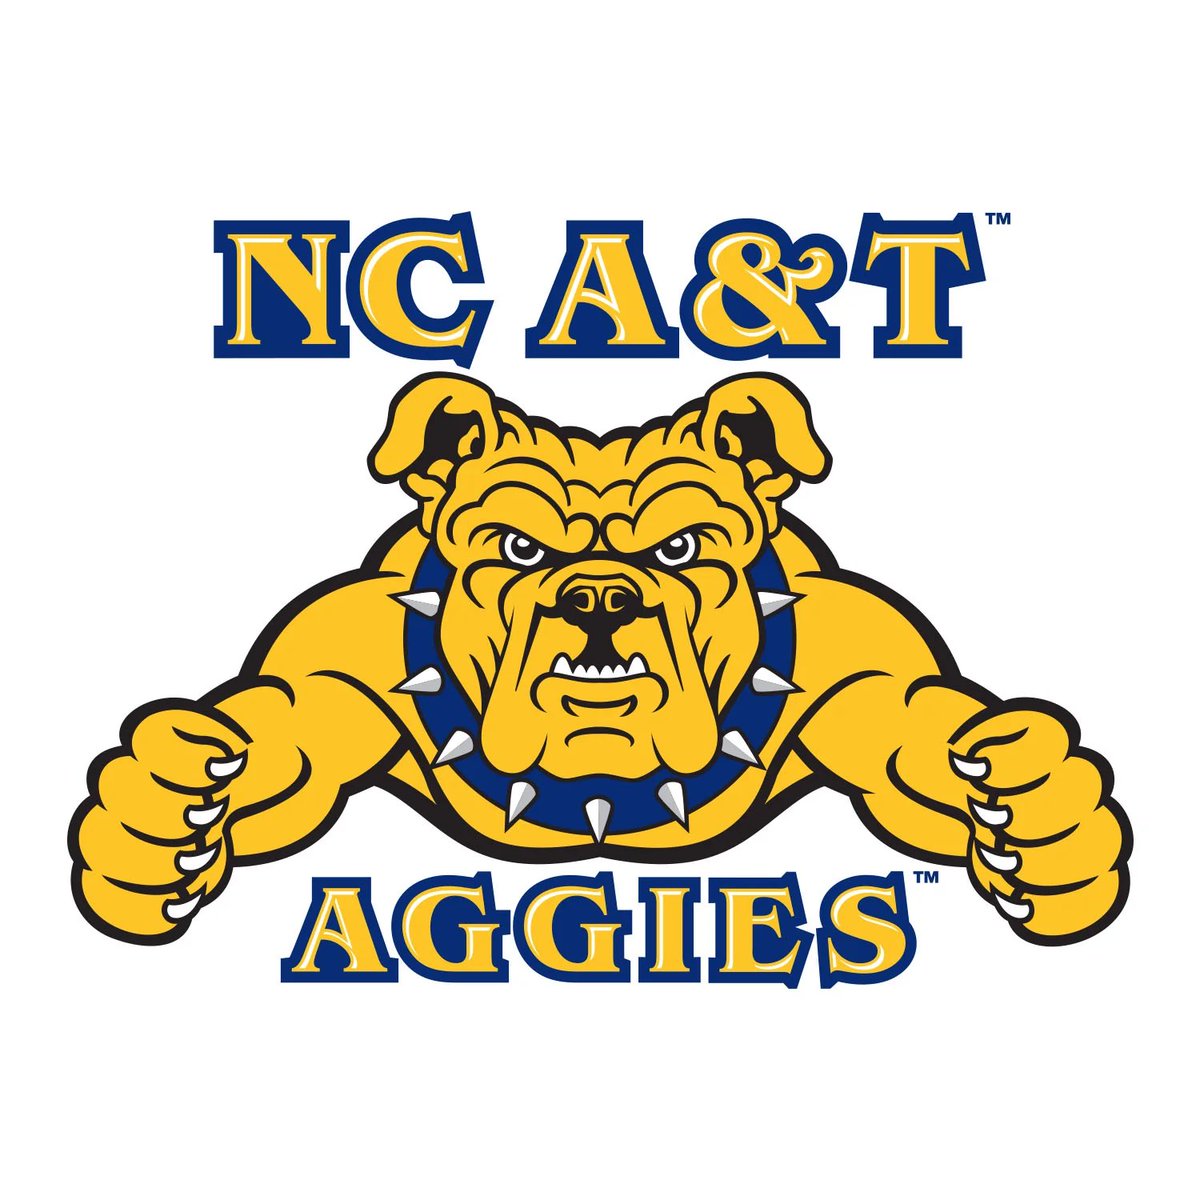 Very Blessed to receive an offer from North Carolina A&T!! @CoachGCarswell @CoachTuftsJr @alex_purviance @grayson_fb @CoachDaniels06 @NEGARecruits @EliteEFT @On3Recruits @RecruitGeorgia